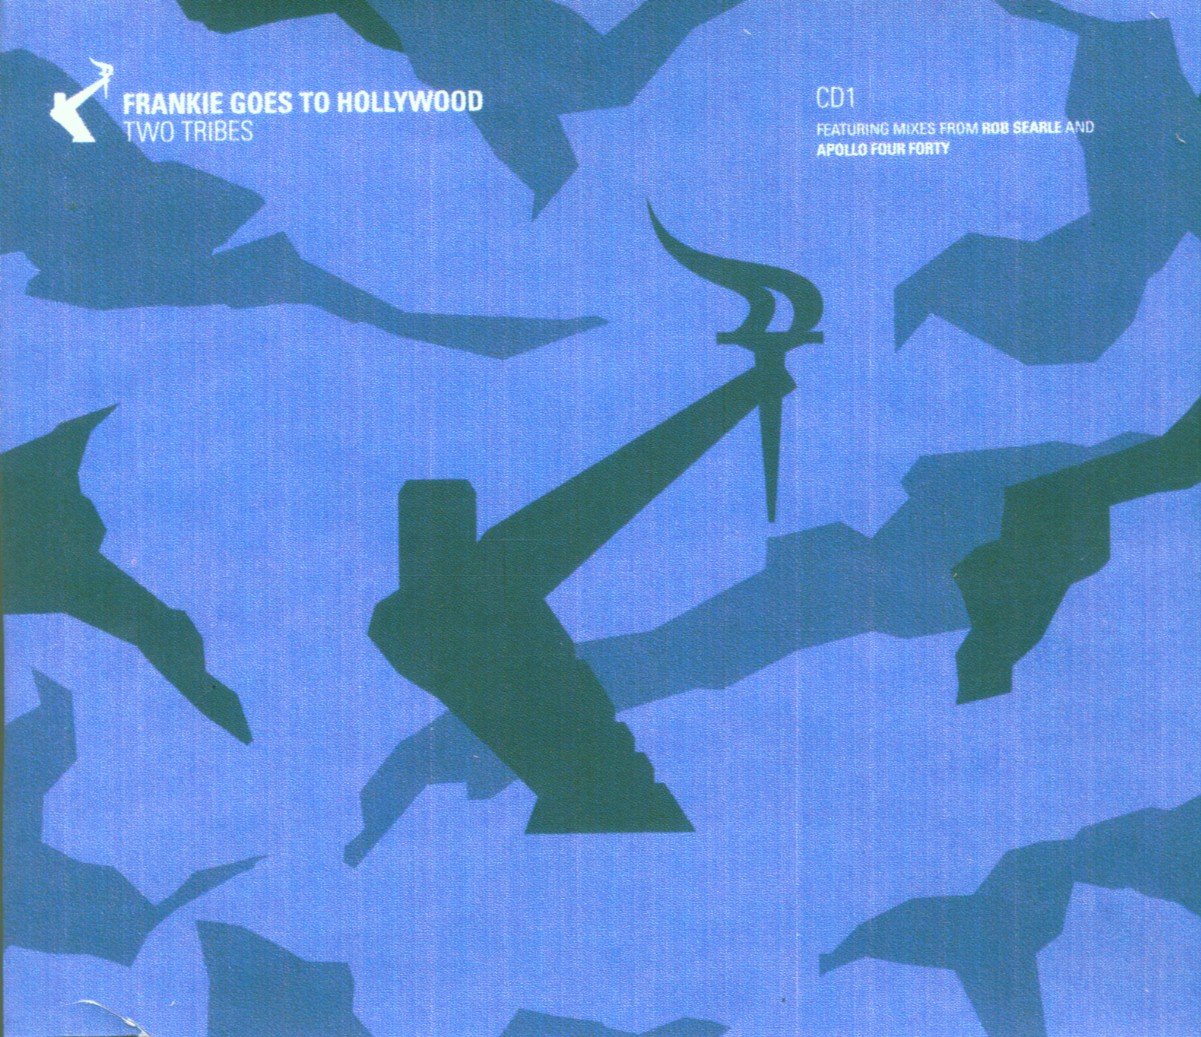 CD Shop - FRANKIE GOES TO HOLLYWOOD TWO TRIBES